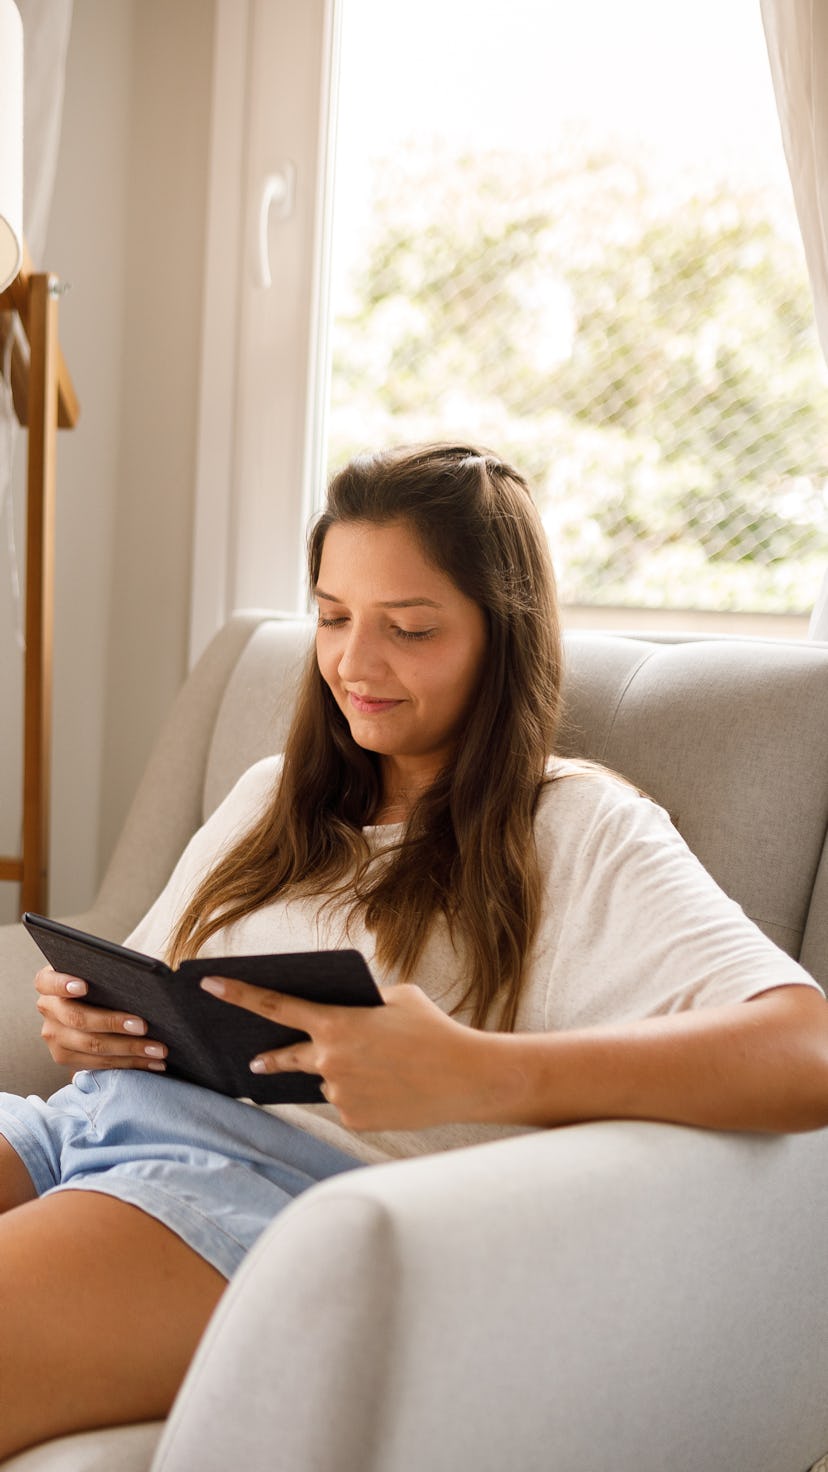 a young woman with long hair sits in a chair, reading an e-book while smiling softly